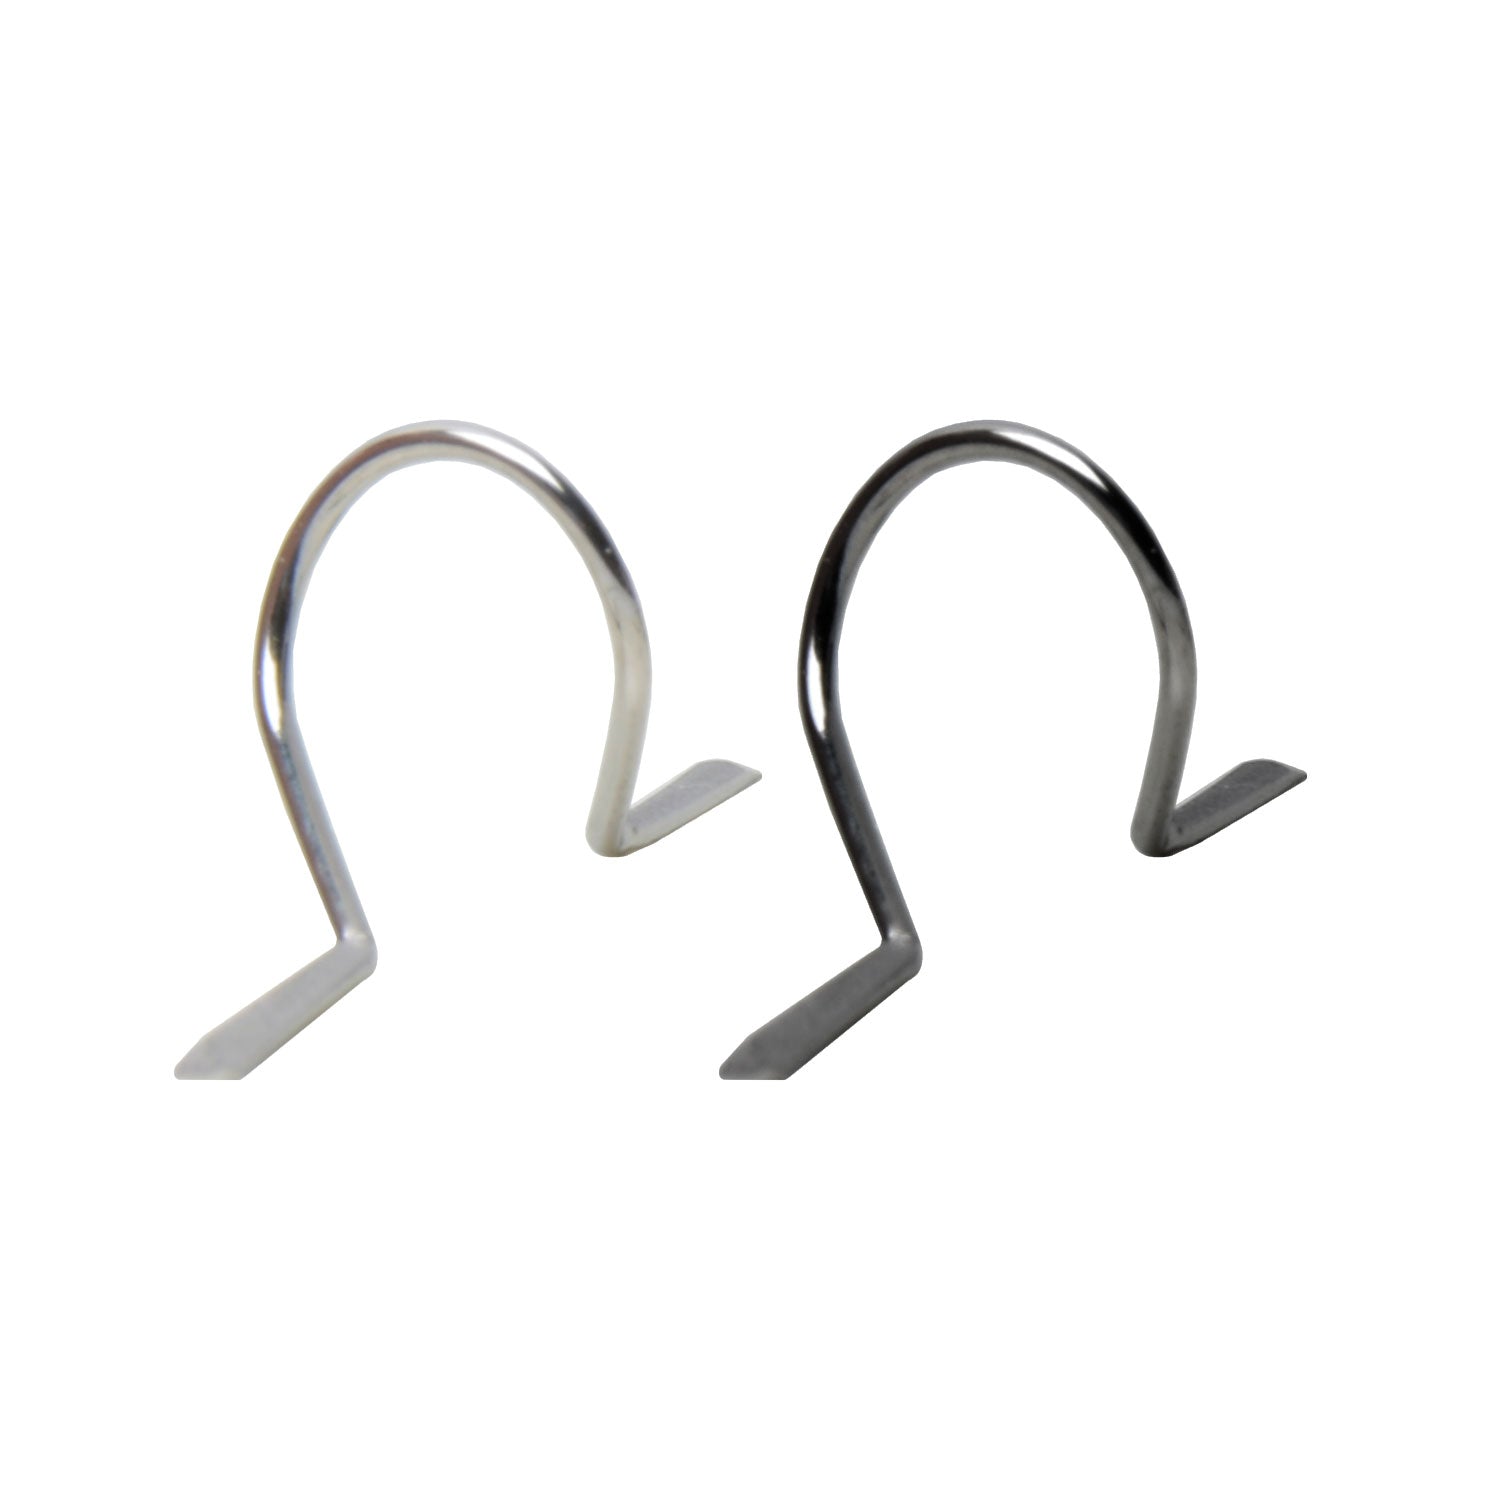 CRB Light Wire Snake Guides